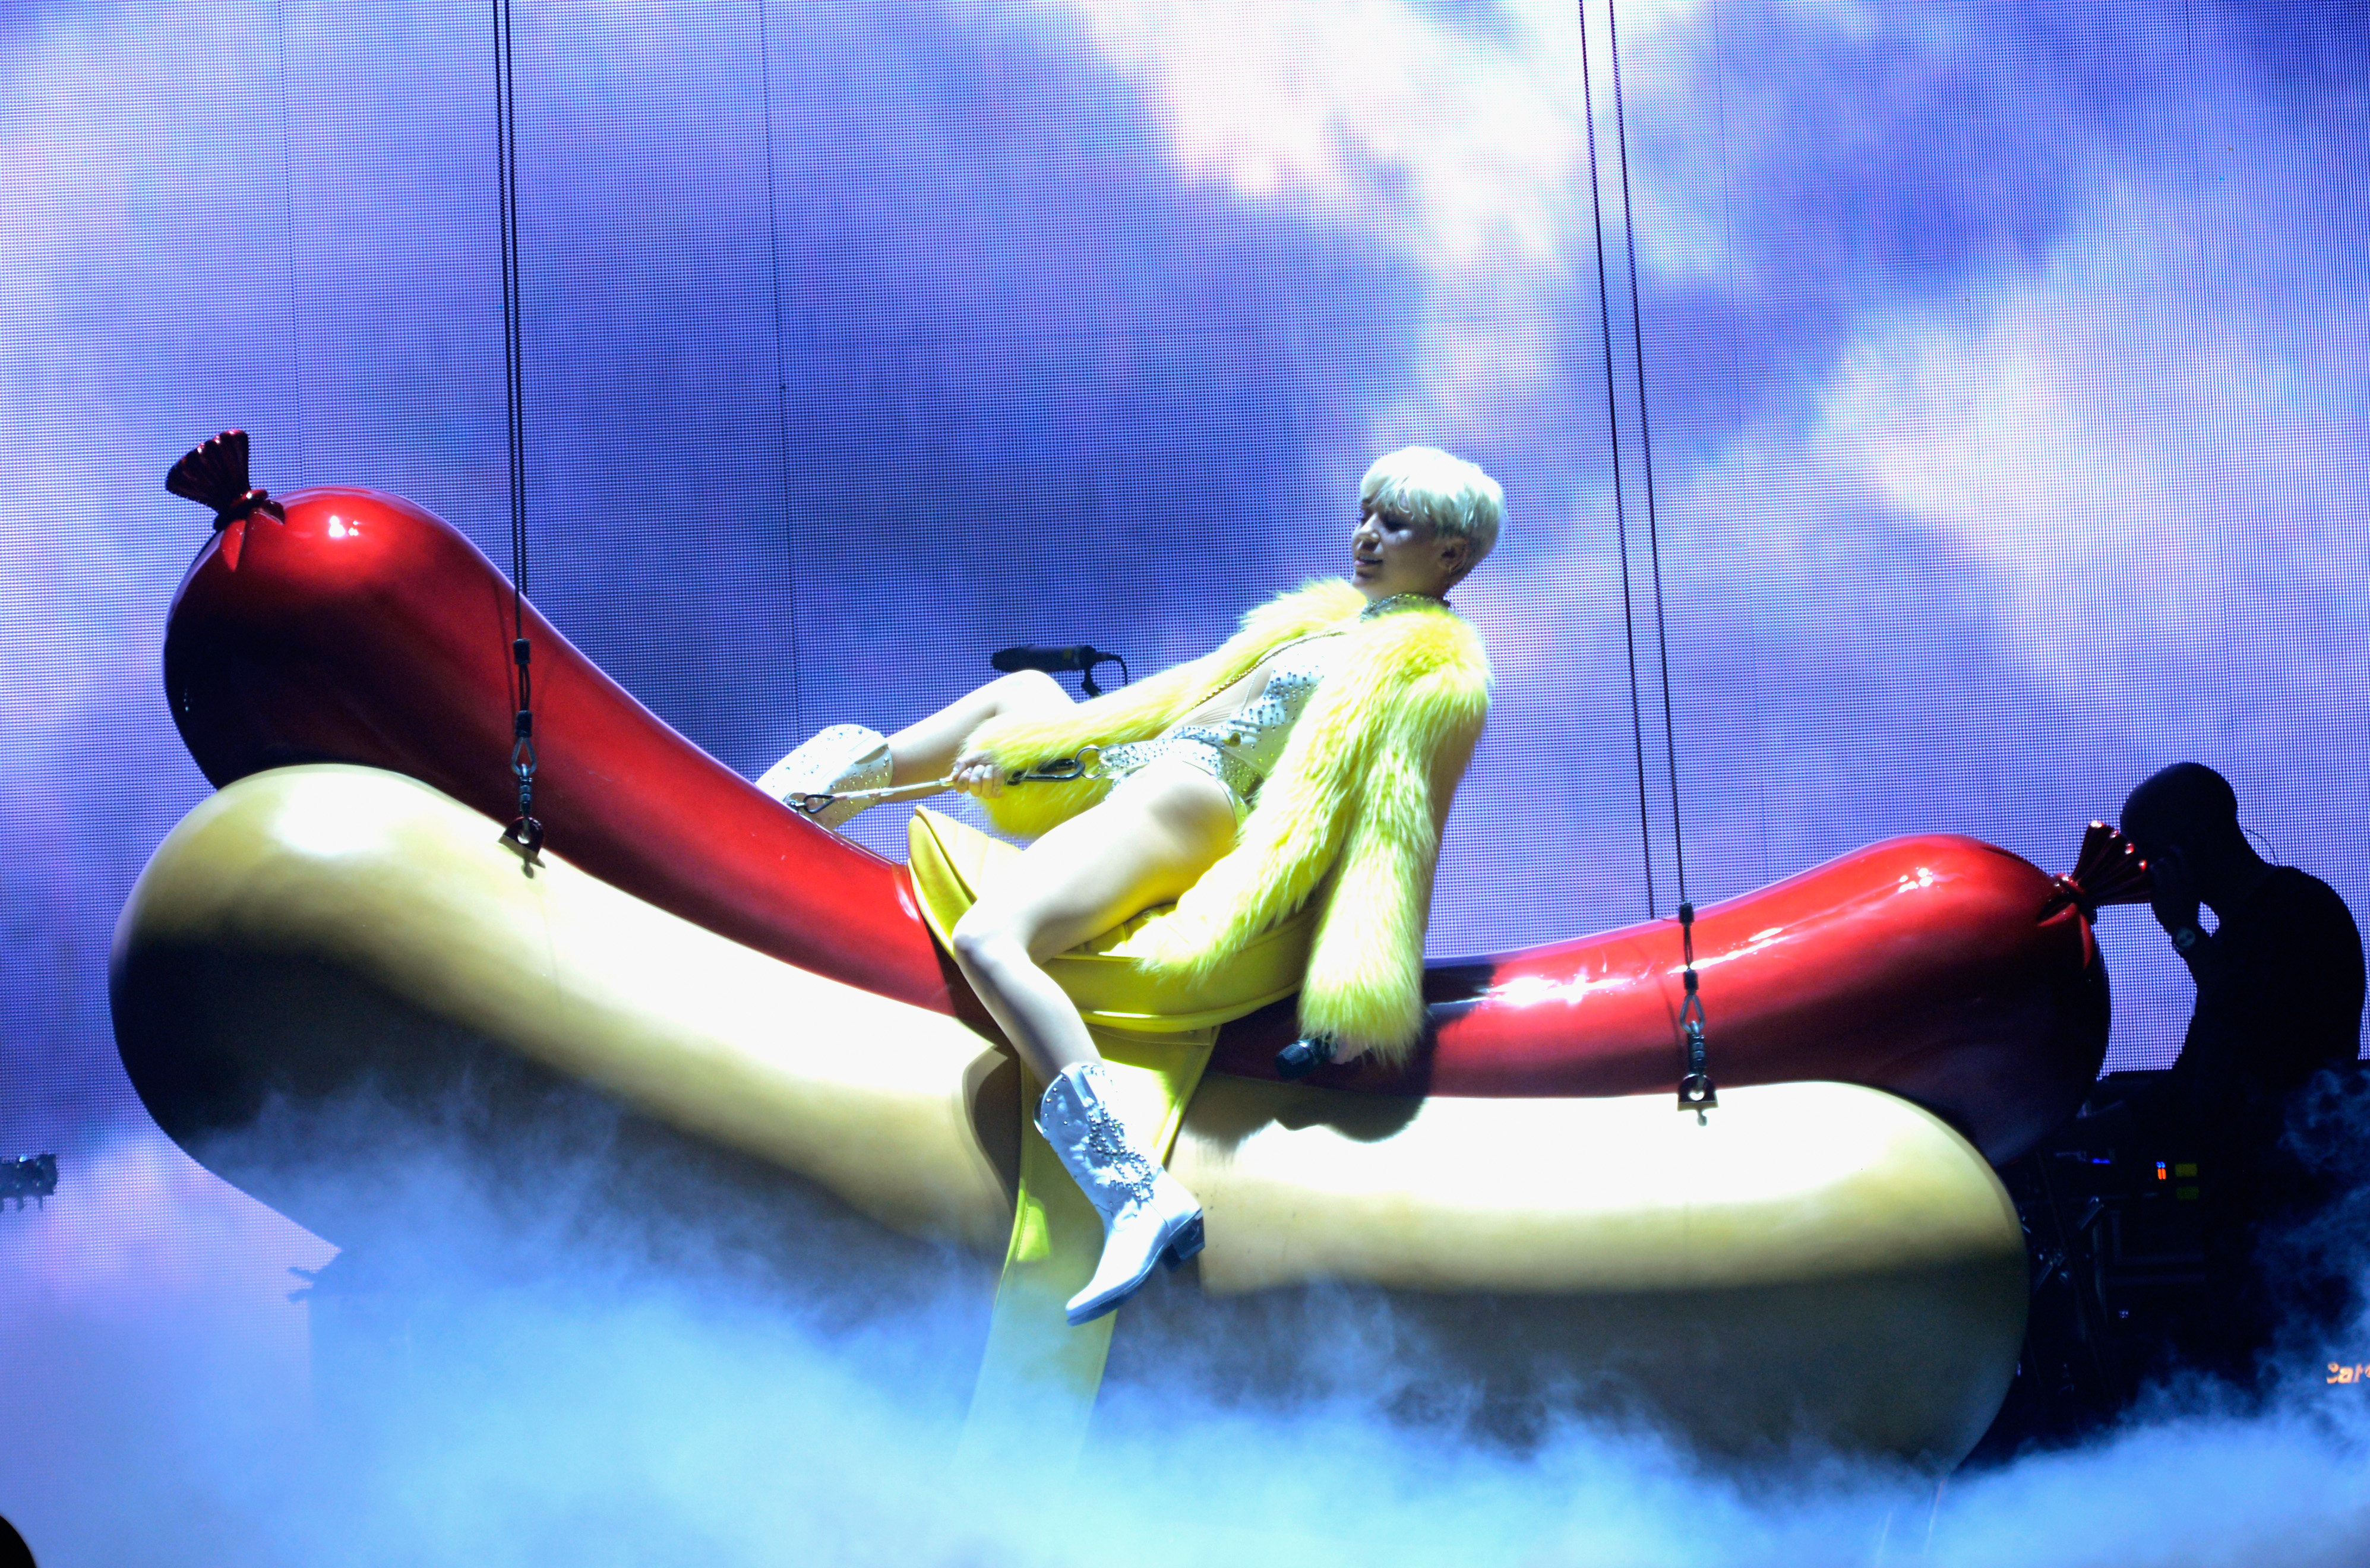 Miley on a giant hot dog